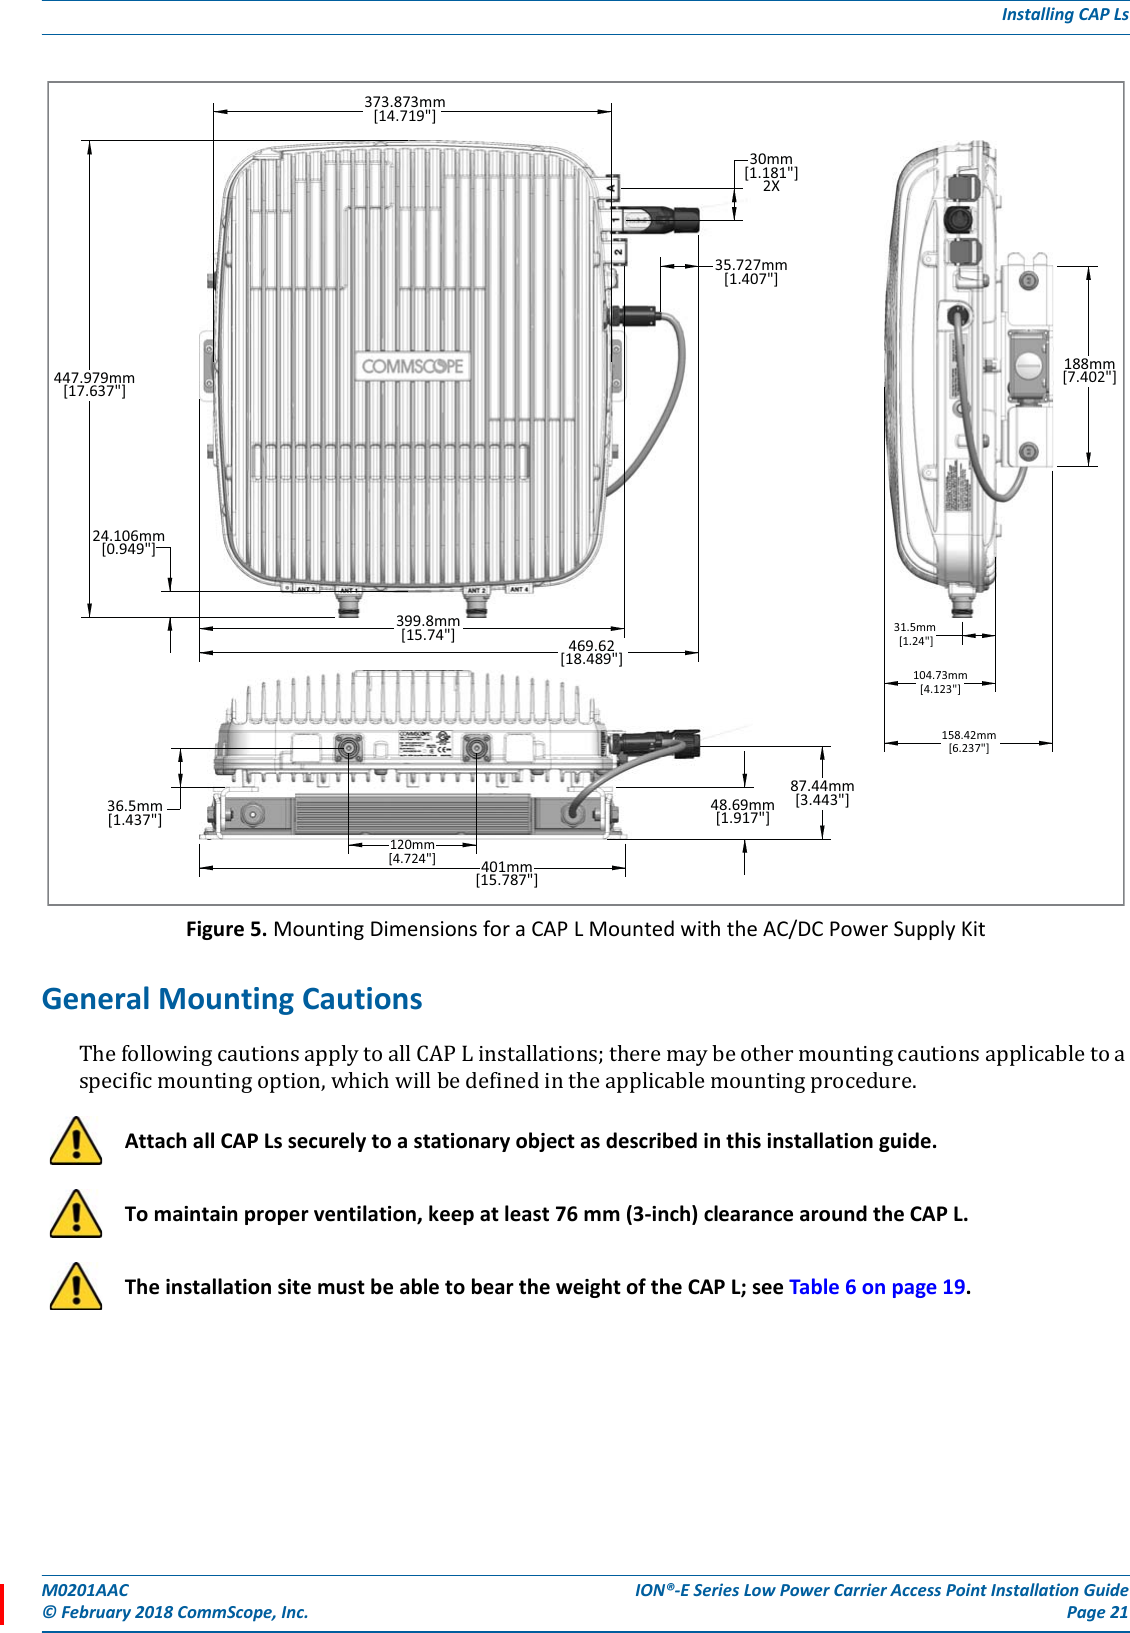 M0201AAC ION®-E Series Low Power Carrier Access Point Installation Guide© February 2018 CommScope, Inc. Page 21Installing CAP LsFigure 5. Mounting Dimensions for a CAP L Mounted with the AC/DC Power Supply KitGeneral Mounting CautionsThefollowingcautionsapplytoallCAPLinstallations;theremaybeothermountingcautionsapplicabletoaspecificmountingoption,whichwillbedefinedintheapplicablemountingprocedure.Attach all CAP Ls securely to a stationary object as described in this installation guide.To maintain proper ventilation, keep at least 76 mm (3-inch) clearance around the CAP L. The installation site must be able to bear the weight of the CAP L; see Table 6 on page 19.120mm[4.724&quot;]36.5mm[1.437&quot;]48.69mm[1.917&quot;]447.979mm[17.637&quot;]24.106mm[0.949&quot;]373.873mm[14.719&quot;]87.44mm[3.443&quot;]399.8mm[15.74&quot;] 469.62[18.489&quot;]35.727mm[1.407&quot;]30mm[1.181&quot;]2X401mm[15.787&quot;]158.42mm[6.237&quot;]188mm[7.402&quot;]104.73mm[4.123&quot;]31.5mm[1.24&quot;]